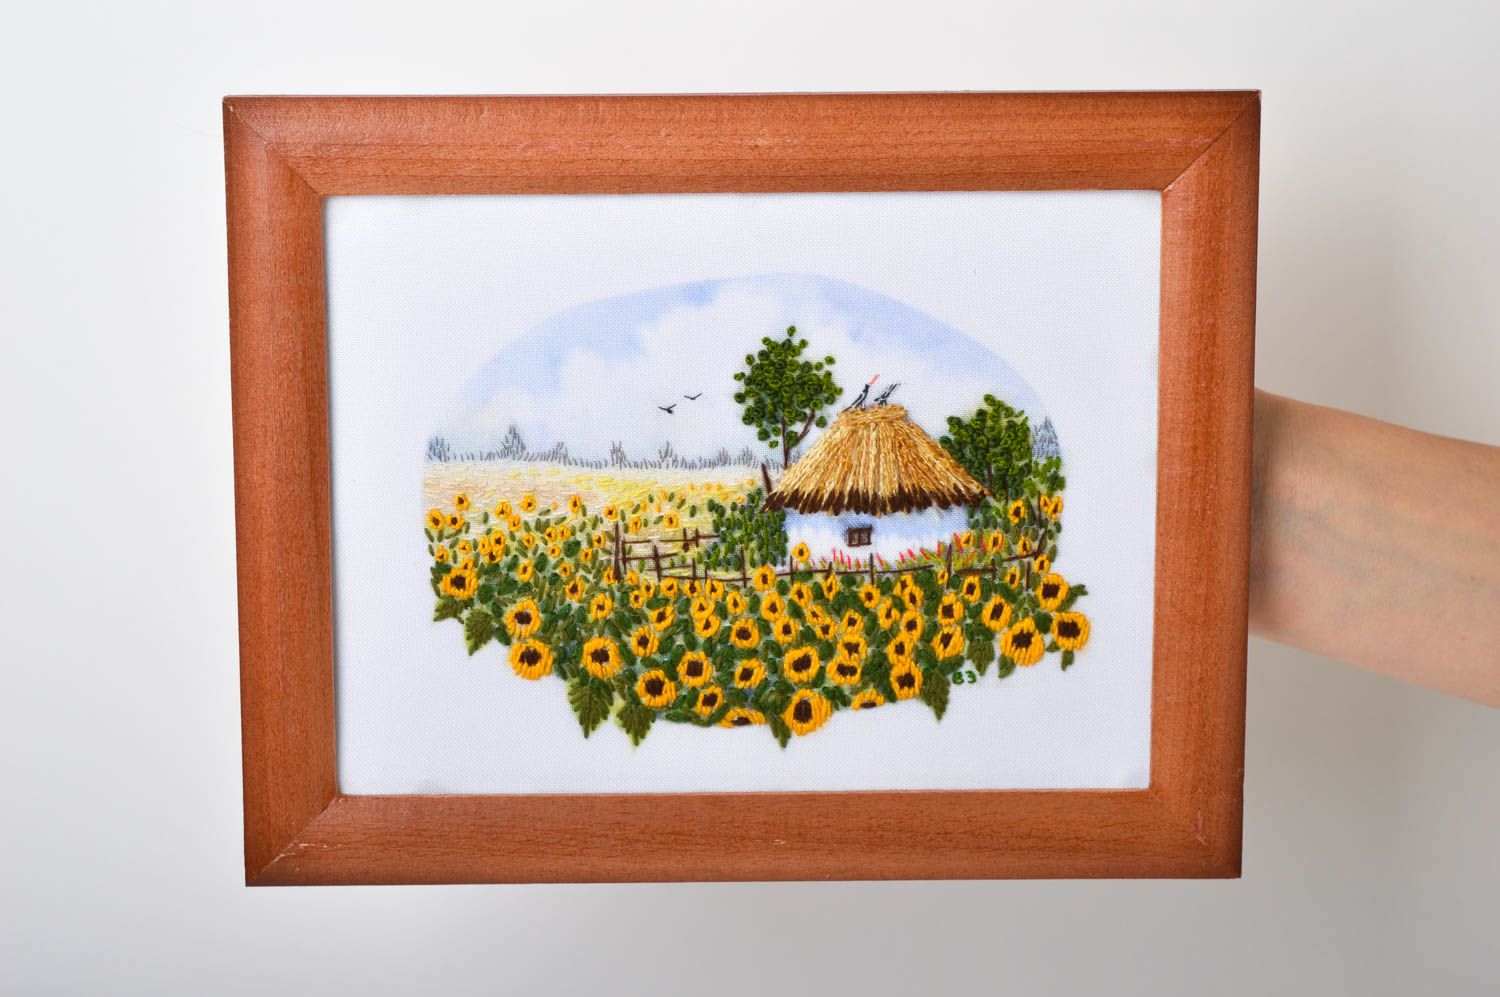 Handmade wall picture with embroidery stitch embroidery decorative use only photo 5